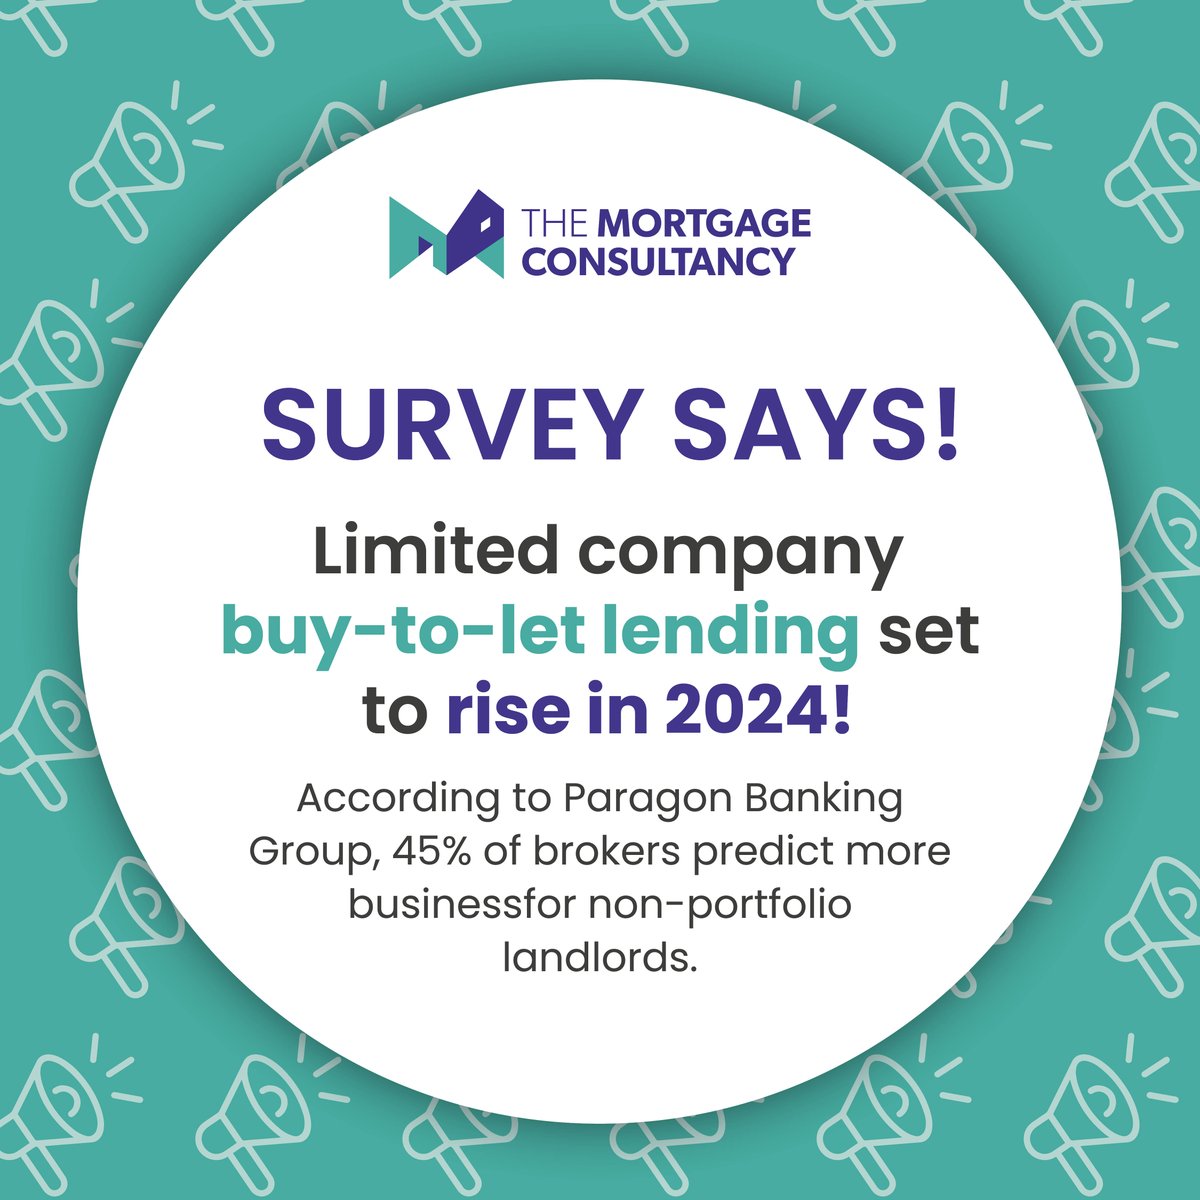 📈 Survey says: Limited company buy-to-let lending set to rise in 2024! According to Paragon Banking Group, 45% of brokers predict more business for non-portfolio landlords. Follow us to stay ahead of the curve!

#MortgageBroker #Kent #Mortgages #MortgageAdvisor #ReMortgages